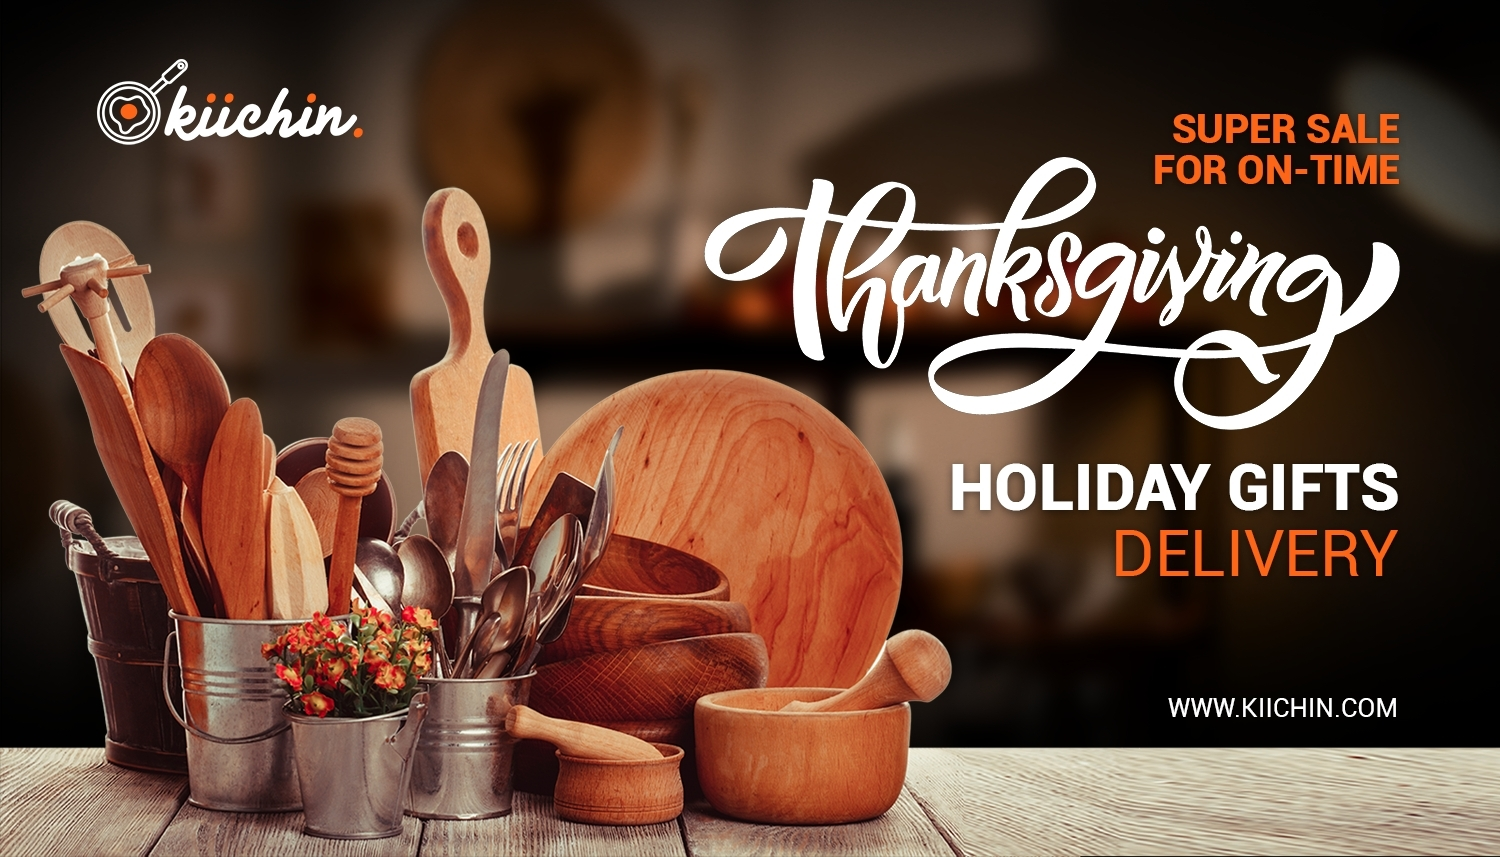 Super Sale for On-Time Thanksgiving Holiday Gifts Delivery